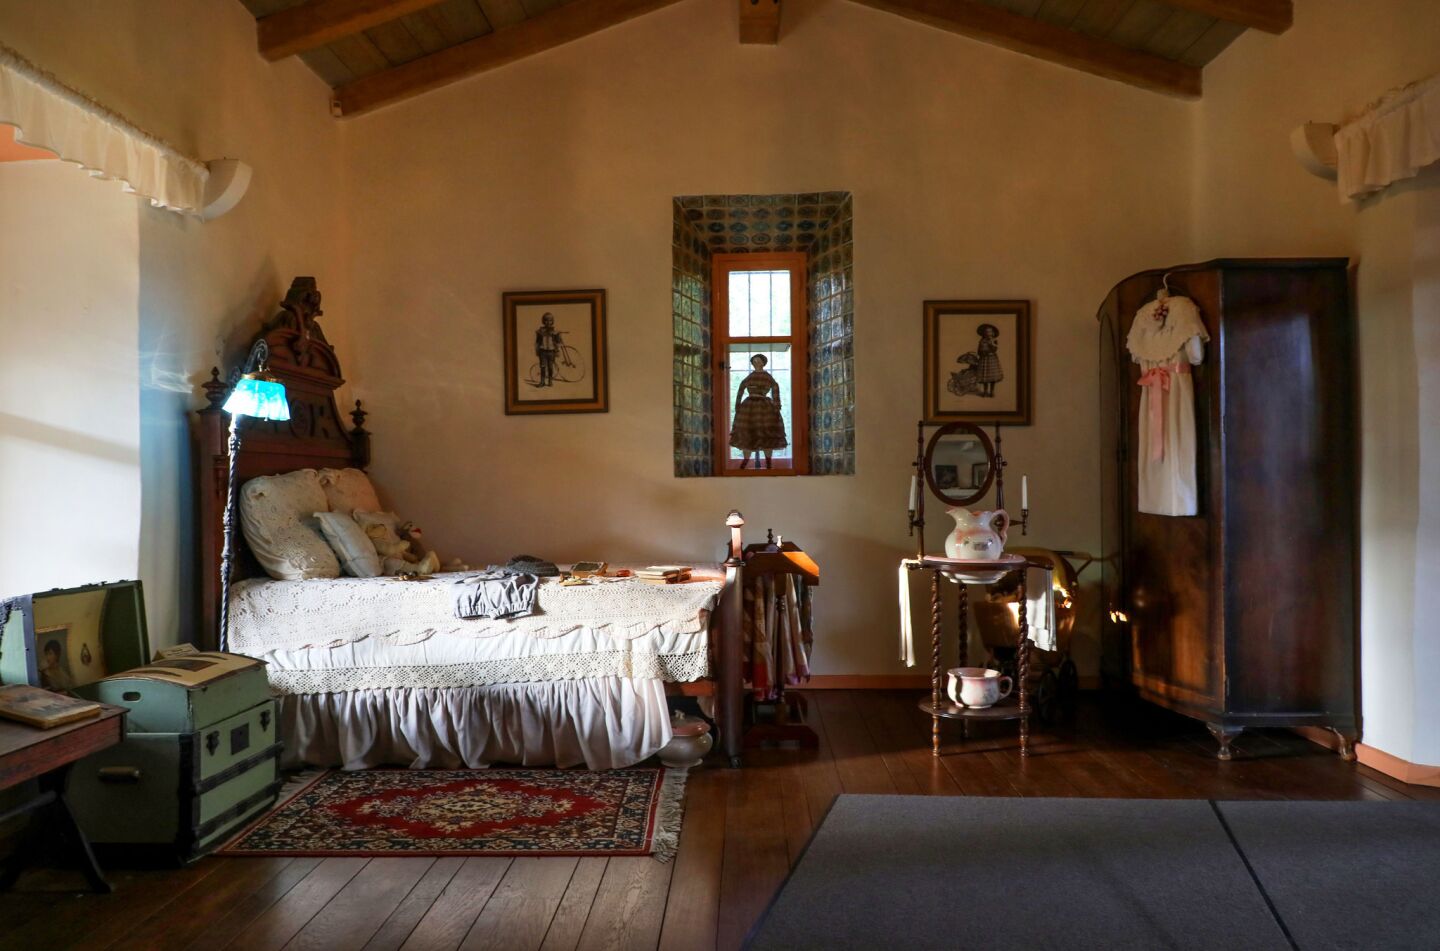 Late afternoon view of a children's bedroom of the Rancho Buena Vista Adobe. This is the original adobe room built in 1852 and is known among staff and visitors as the "stinky room" because visitors associate it with the smell of horse manure and feed.